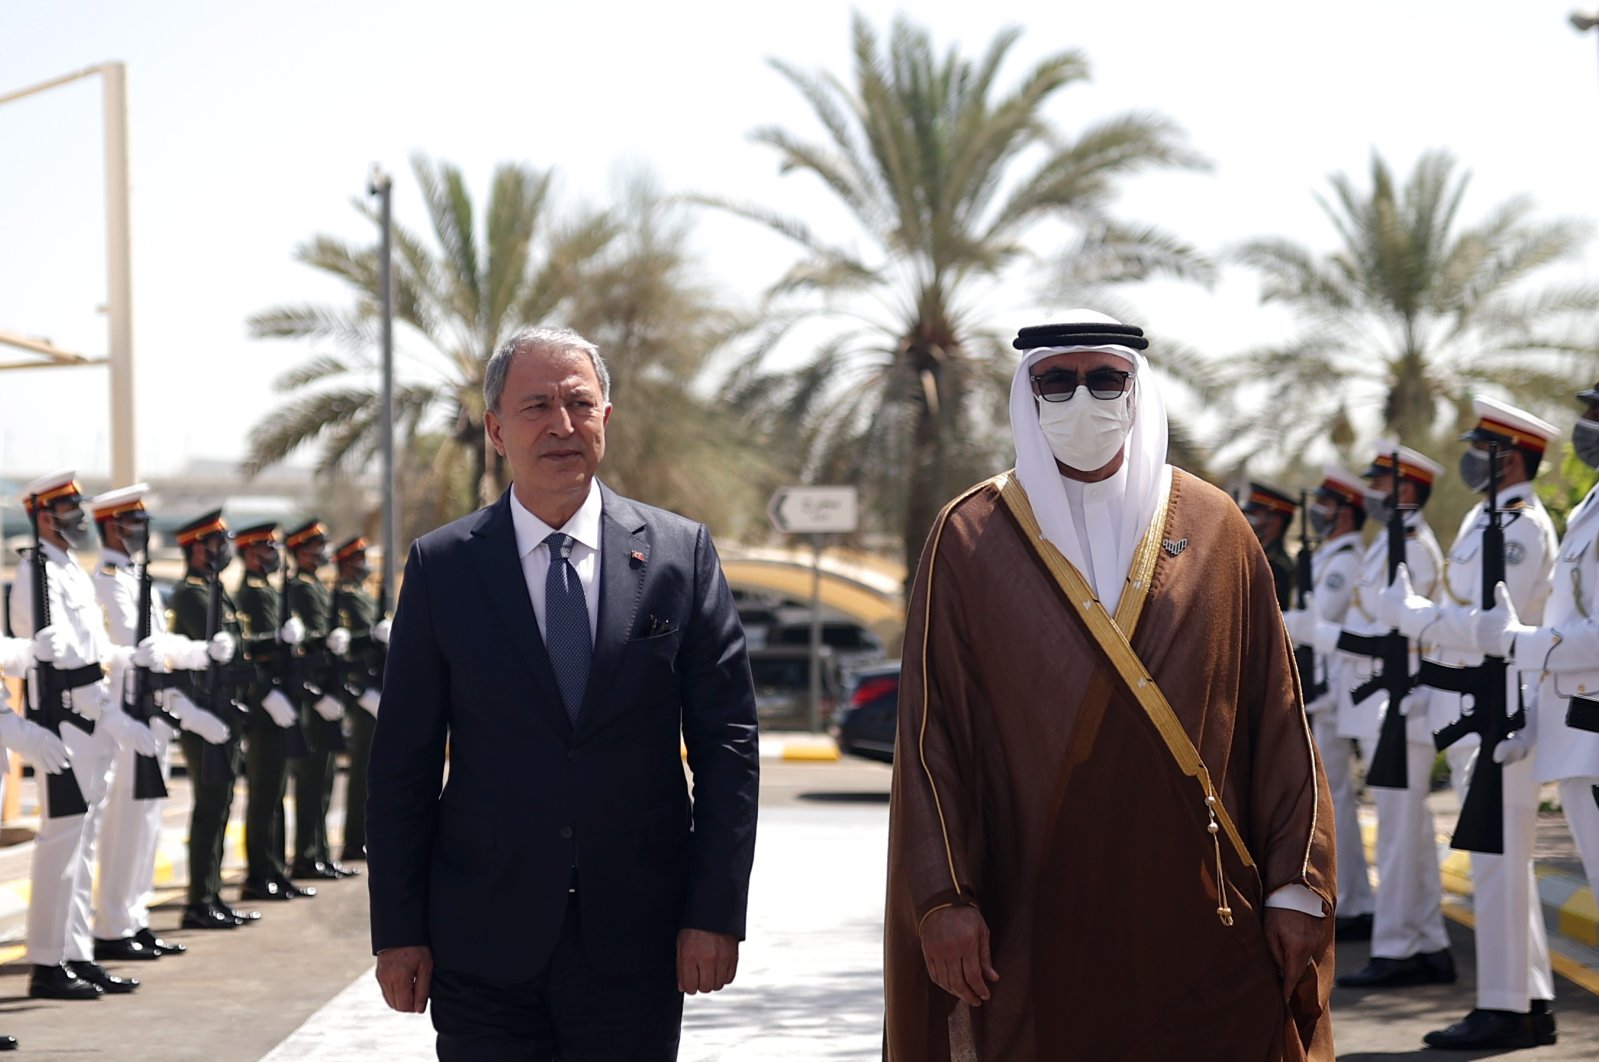 Defense Minister Hulusi Akar (L) is received by his Emirati counterpart Mohammed Ahmed Al Bowardi with an official ceremony in Abu Dhabi, UAE, May 30, 2022. (AA Photo)